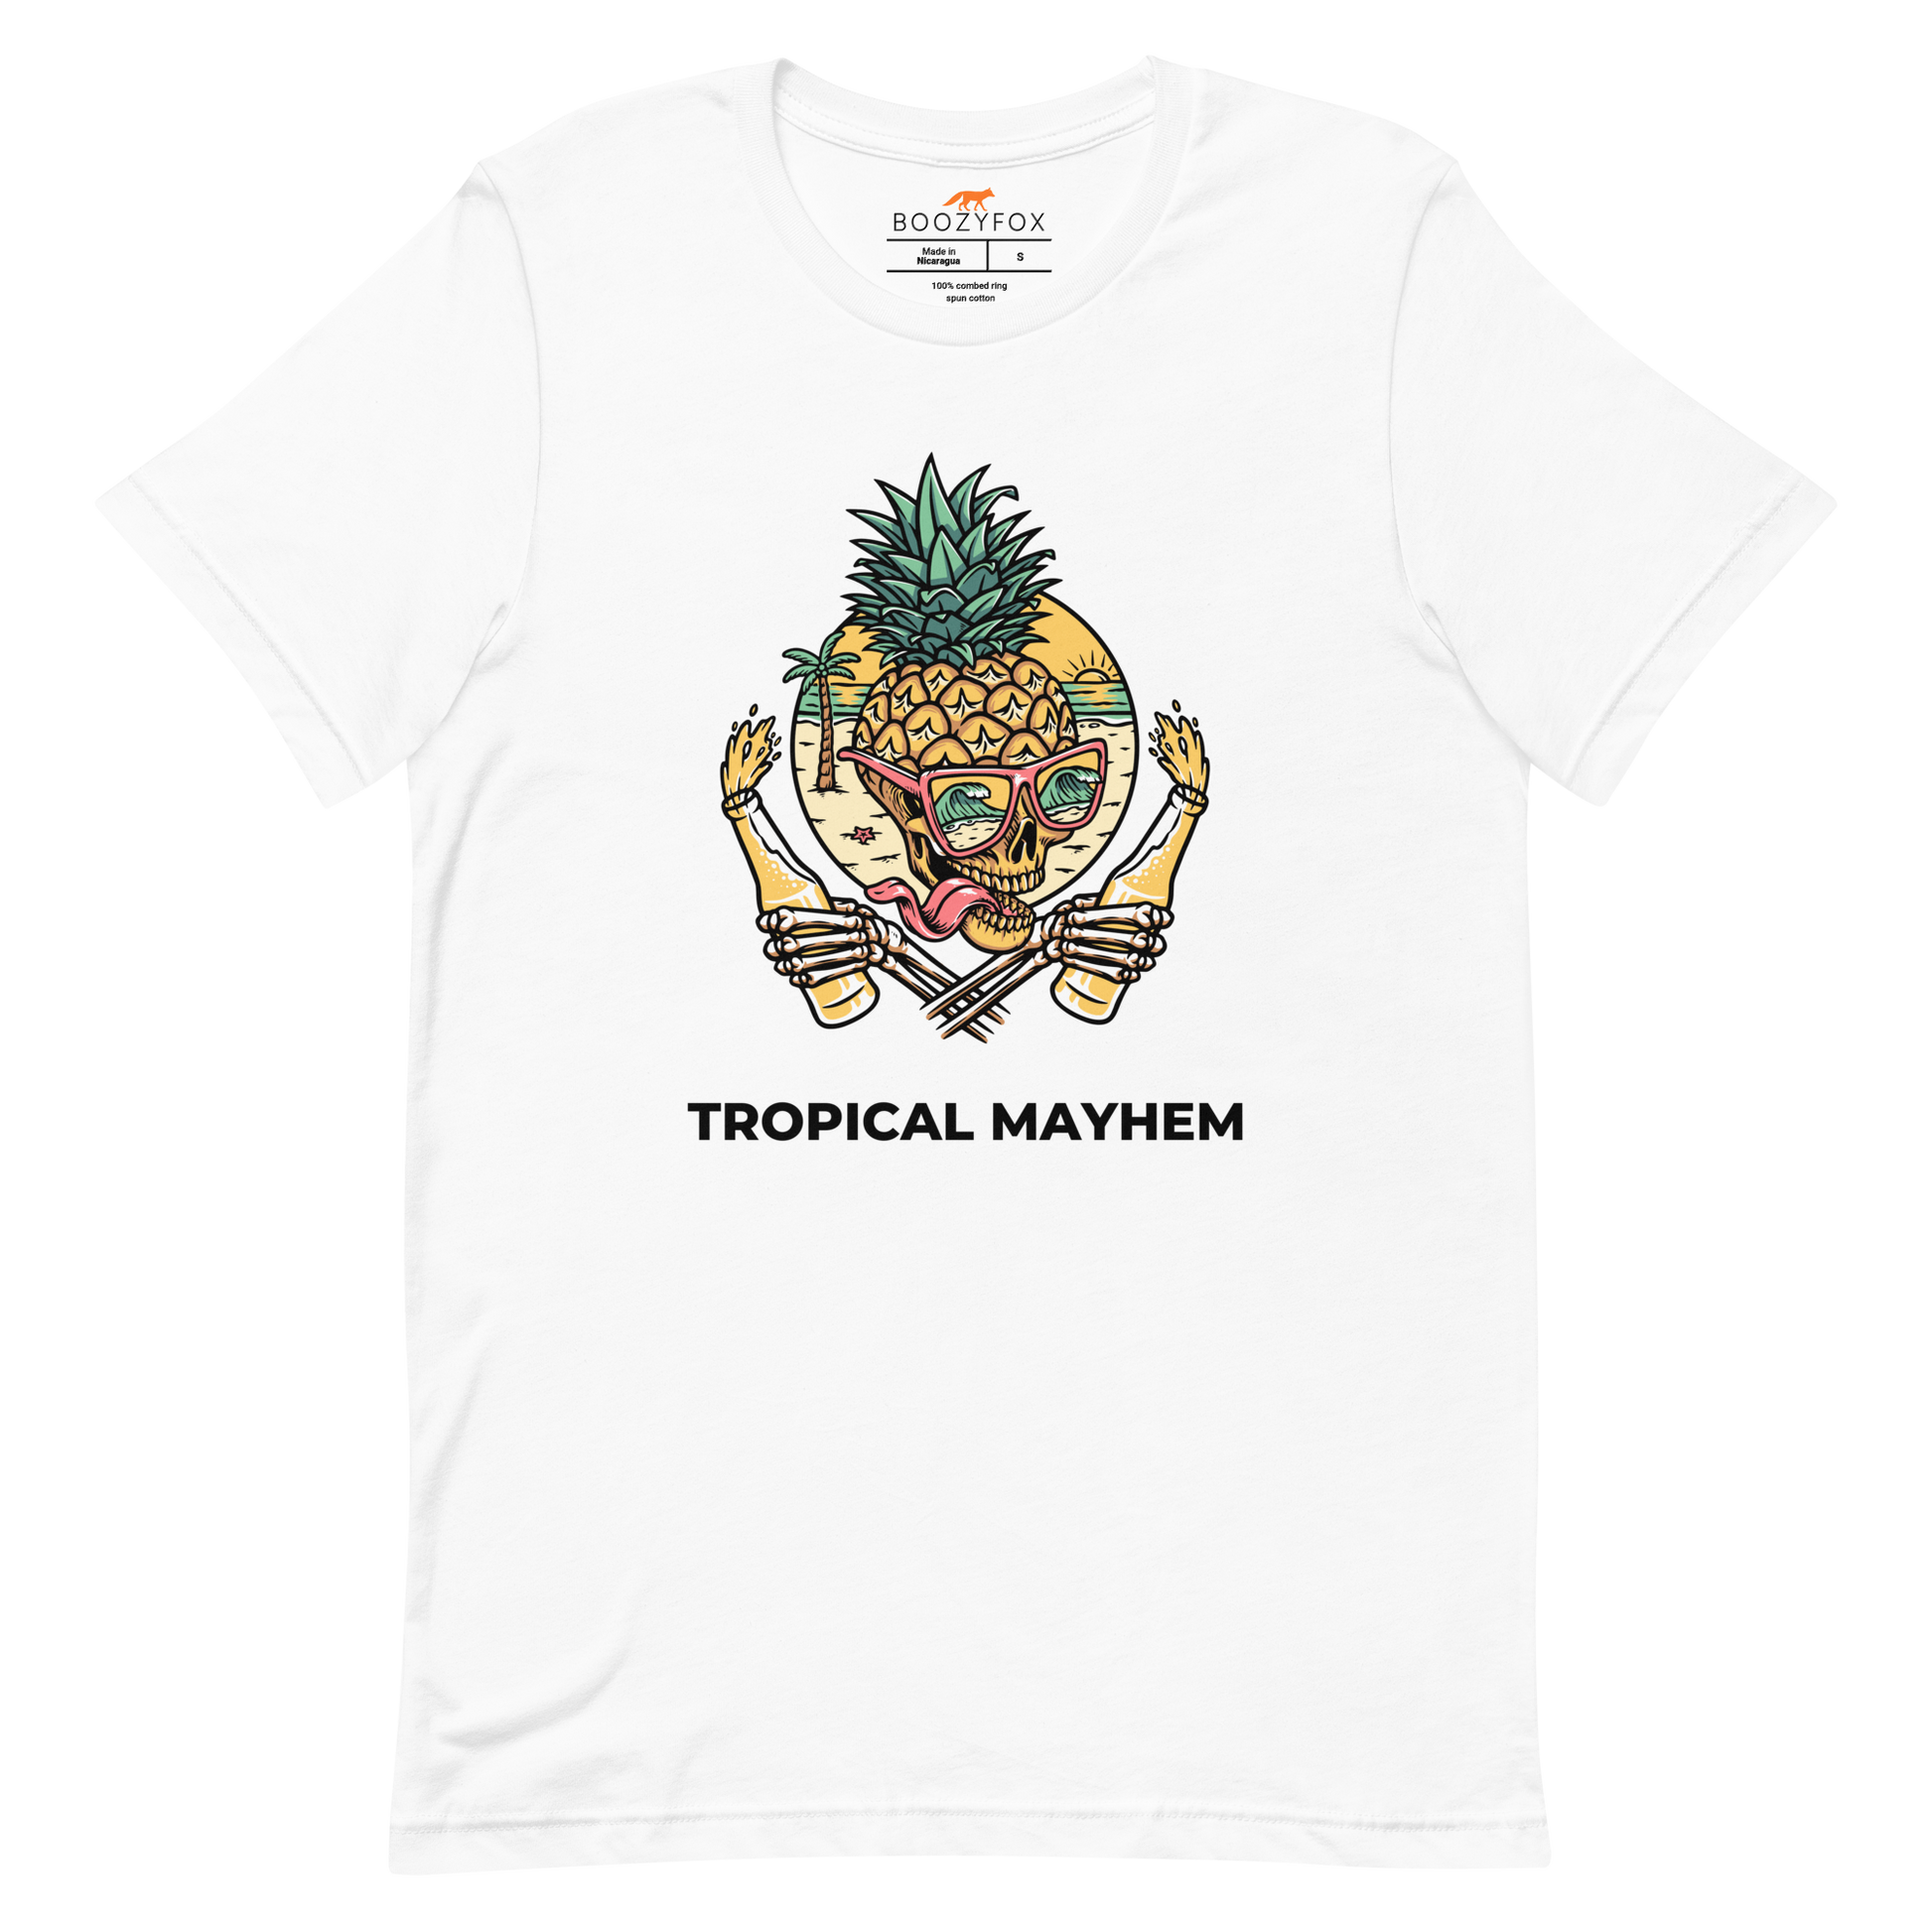 White Premium Tropical Mayhem Tee featuring a Crazy Pineapple Skull graphic on the chest - Funny Graphic Pineapple Tees - Boozy Fox